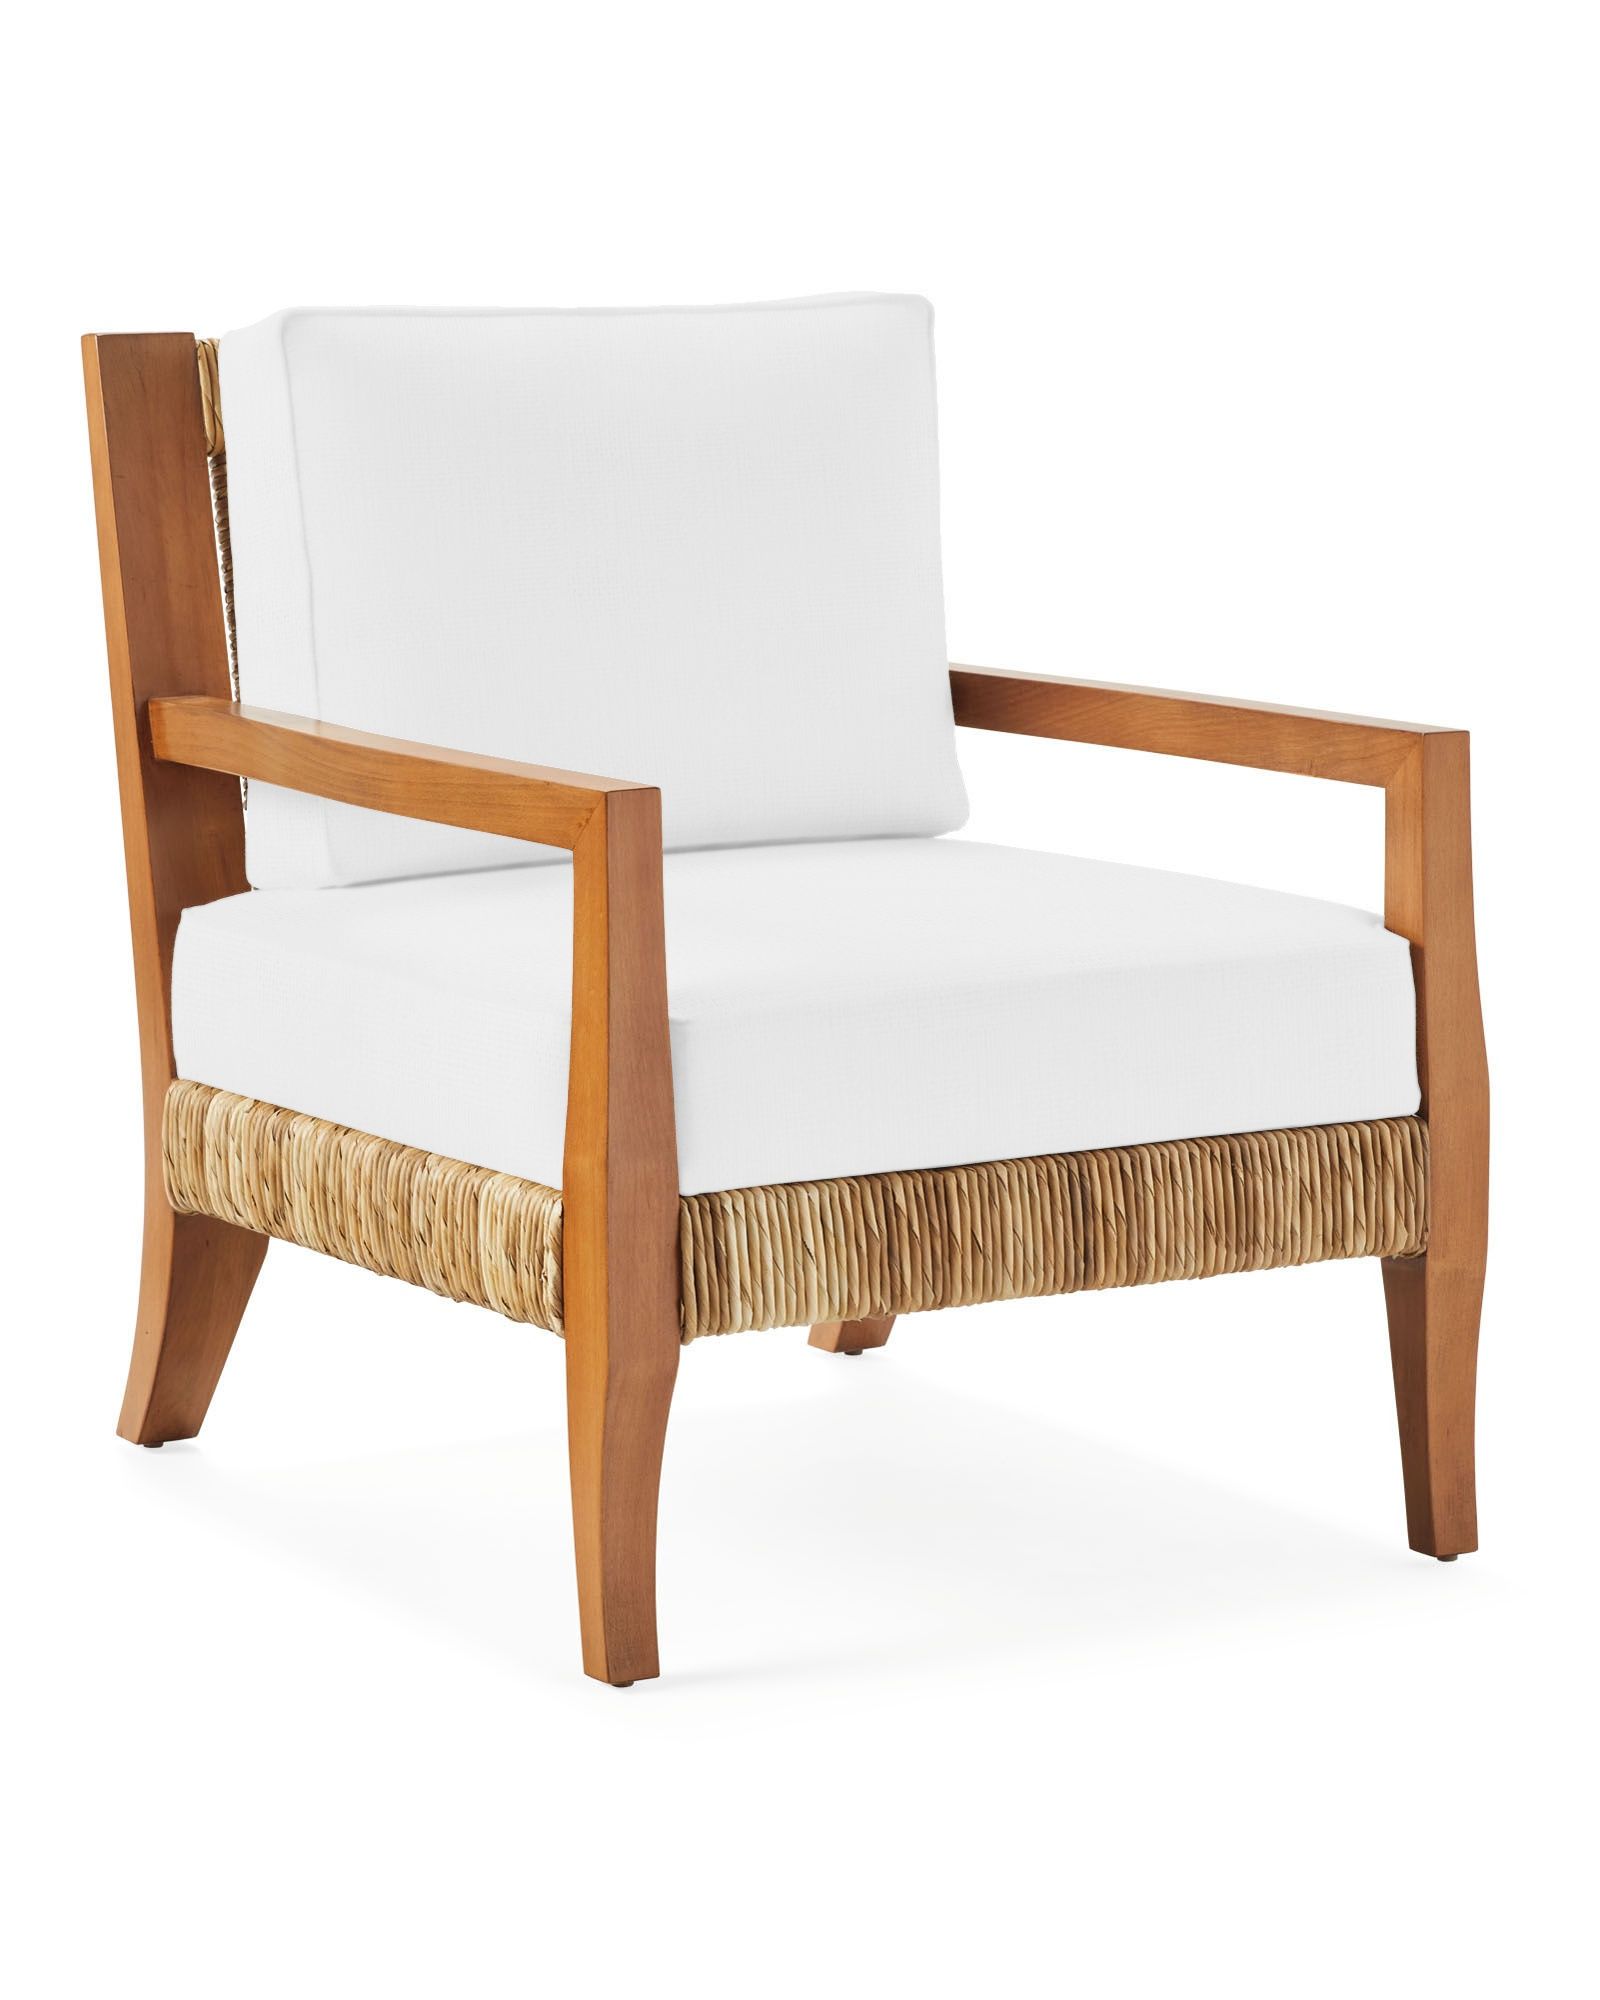 Comporta Lounge Chair | Serena and Lily